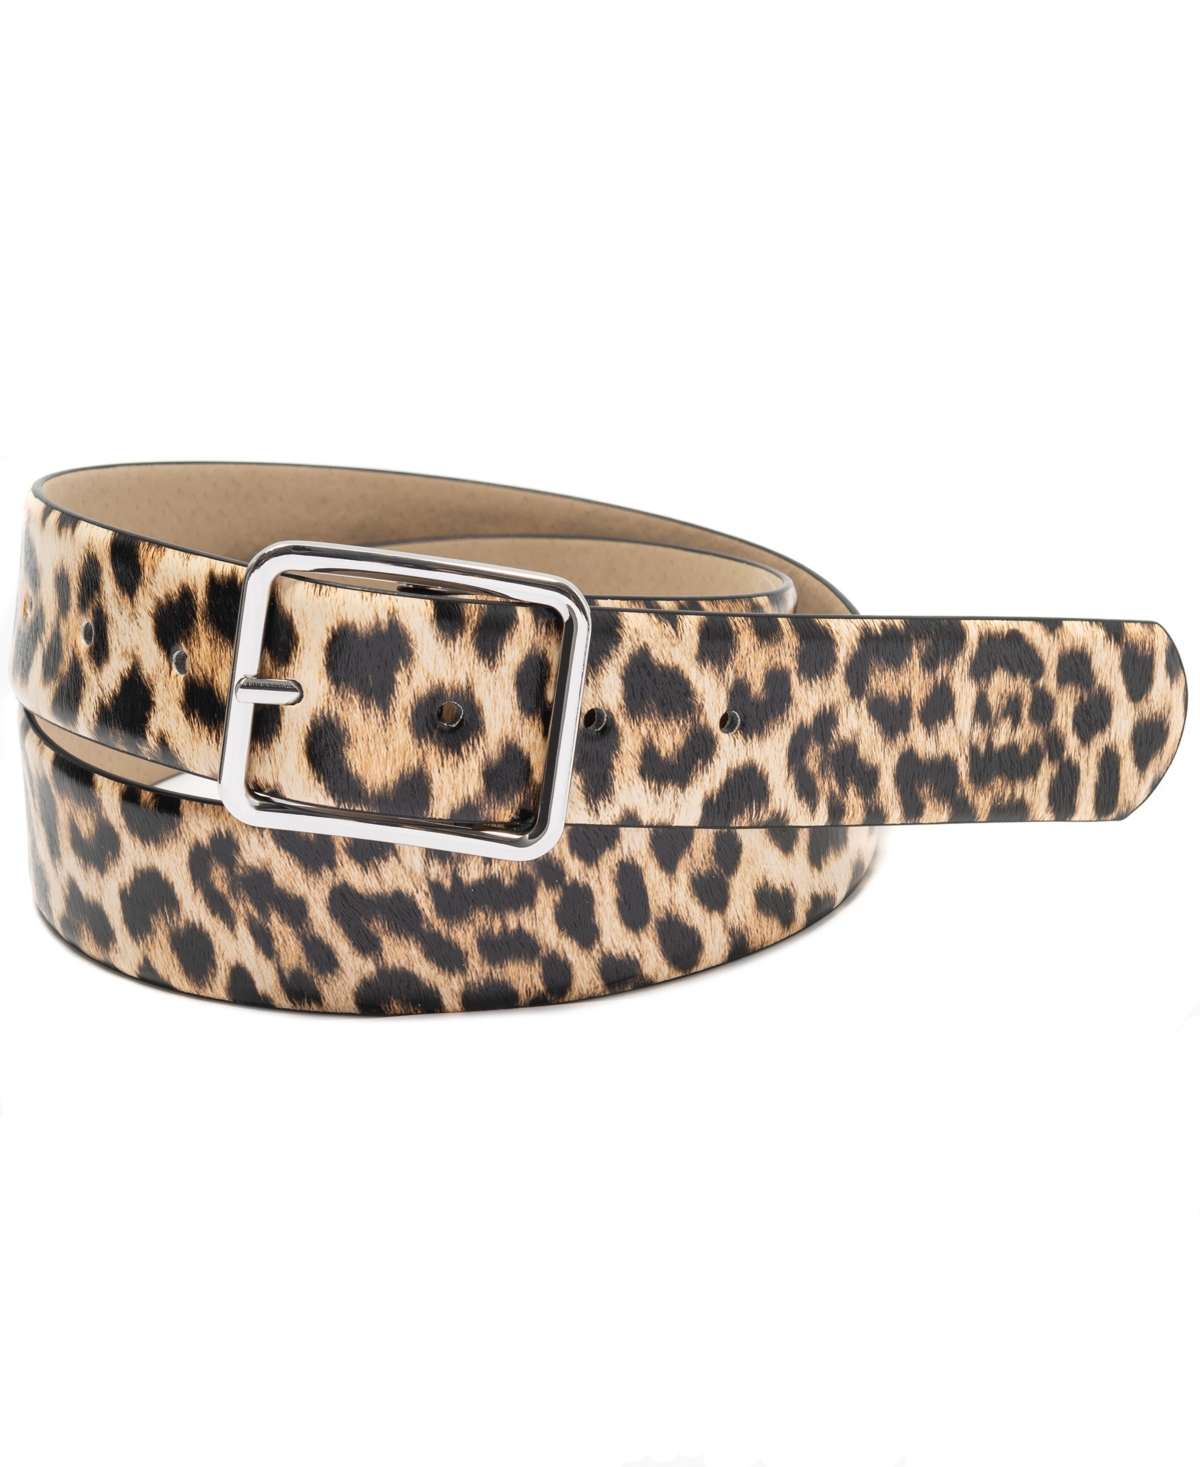 Animal Print Panel Belt, Created for Macy's - Leopard/Silver